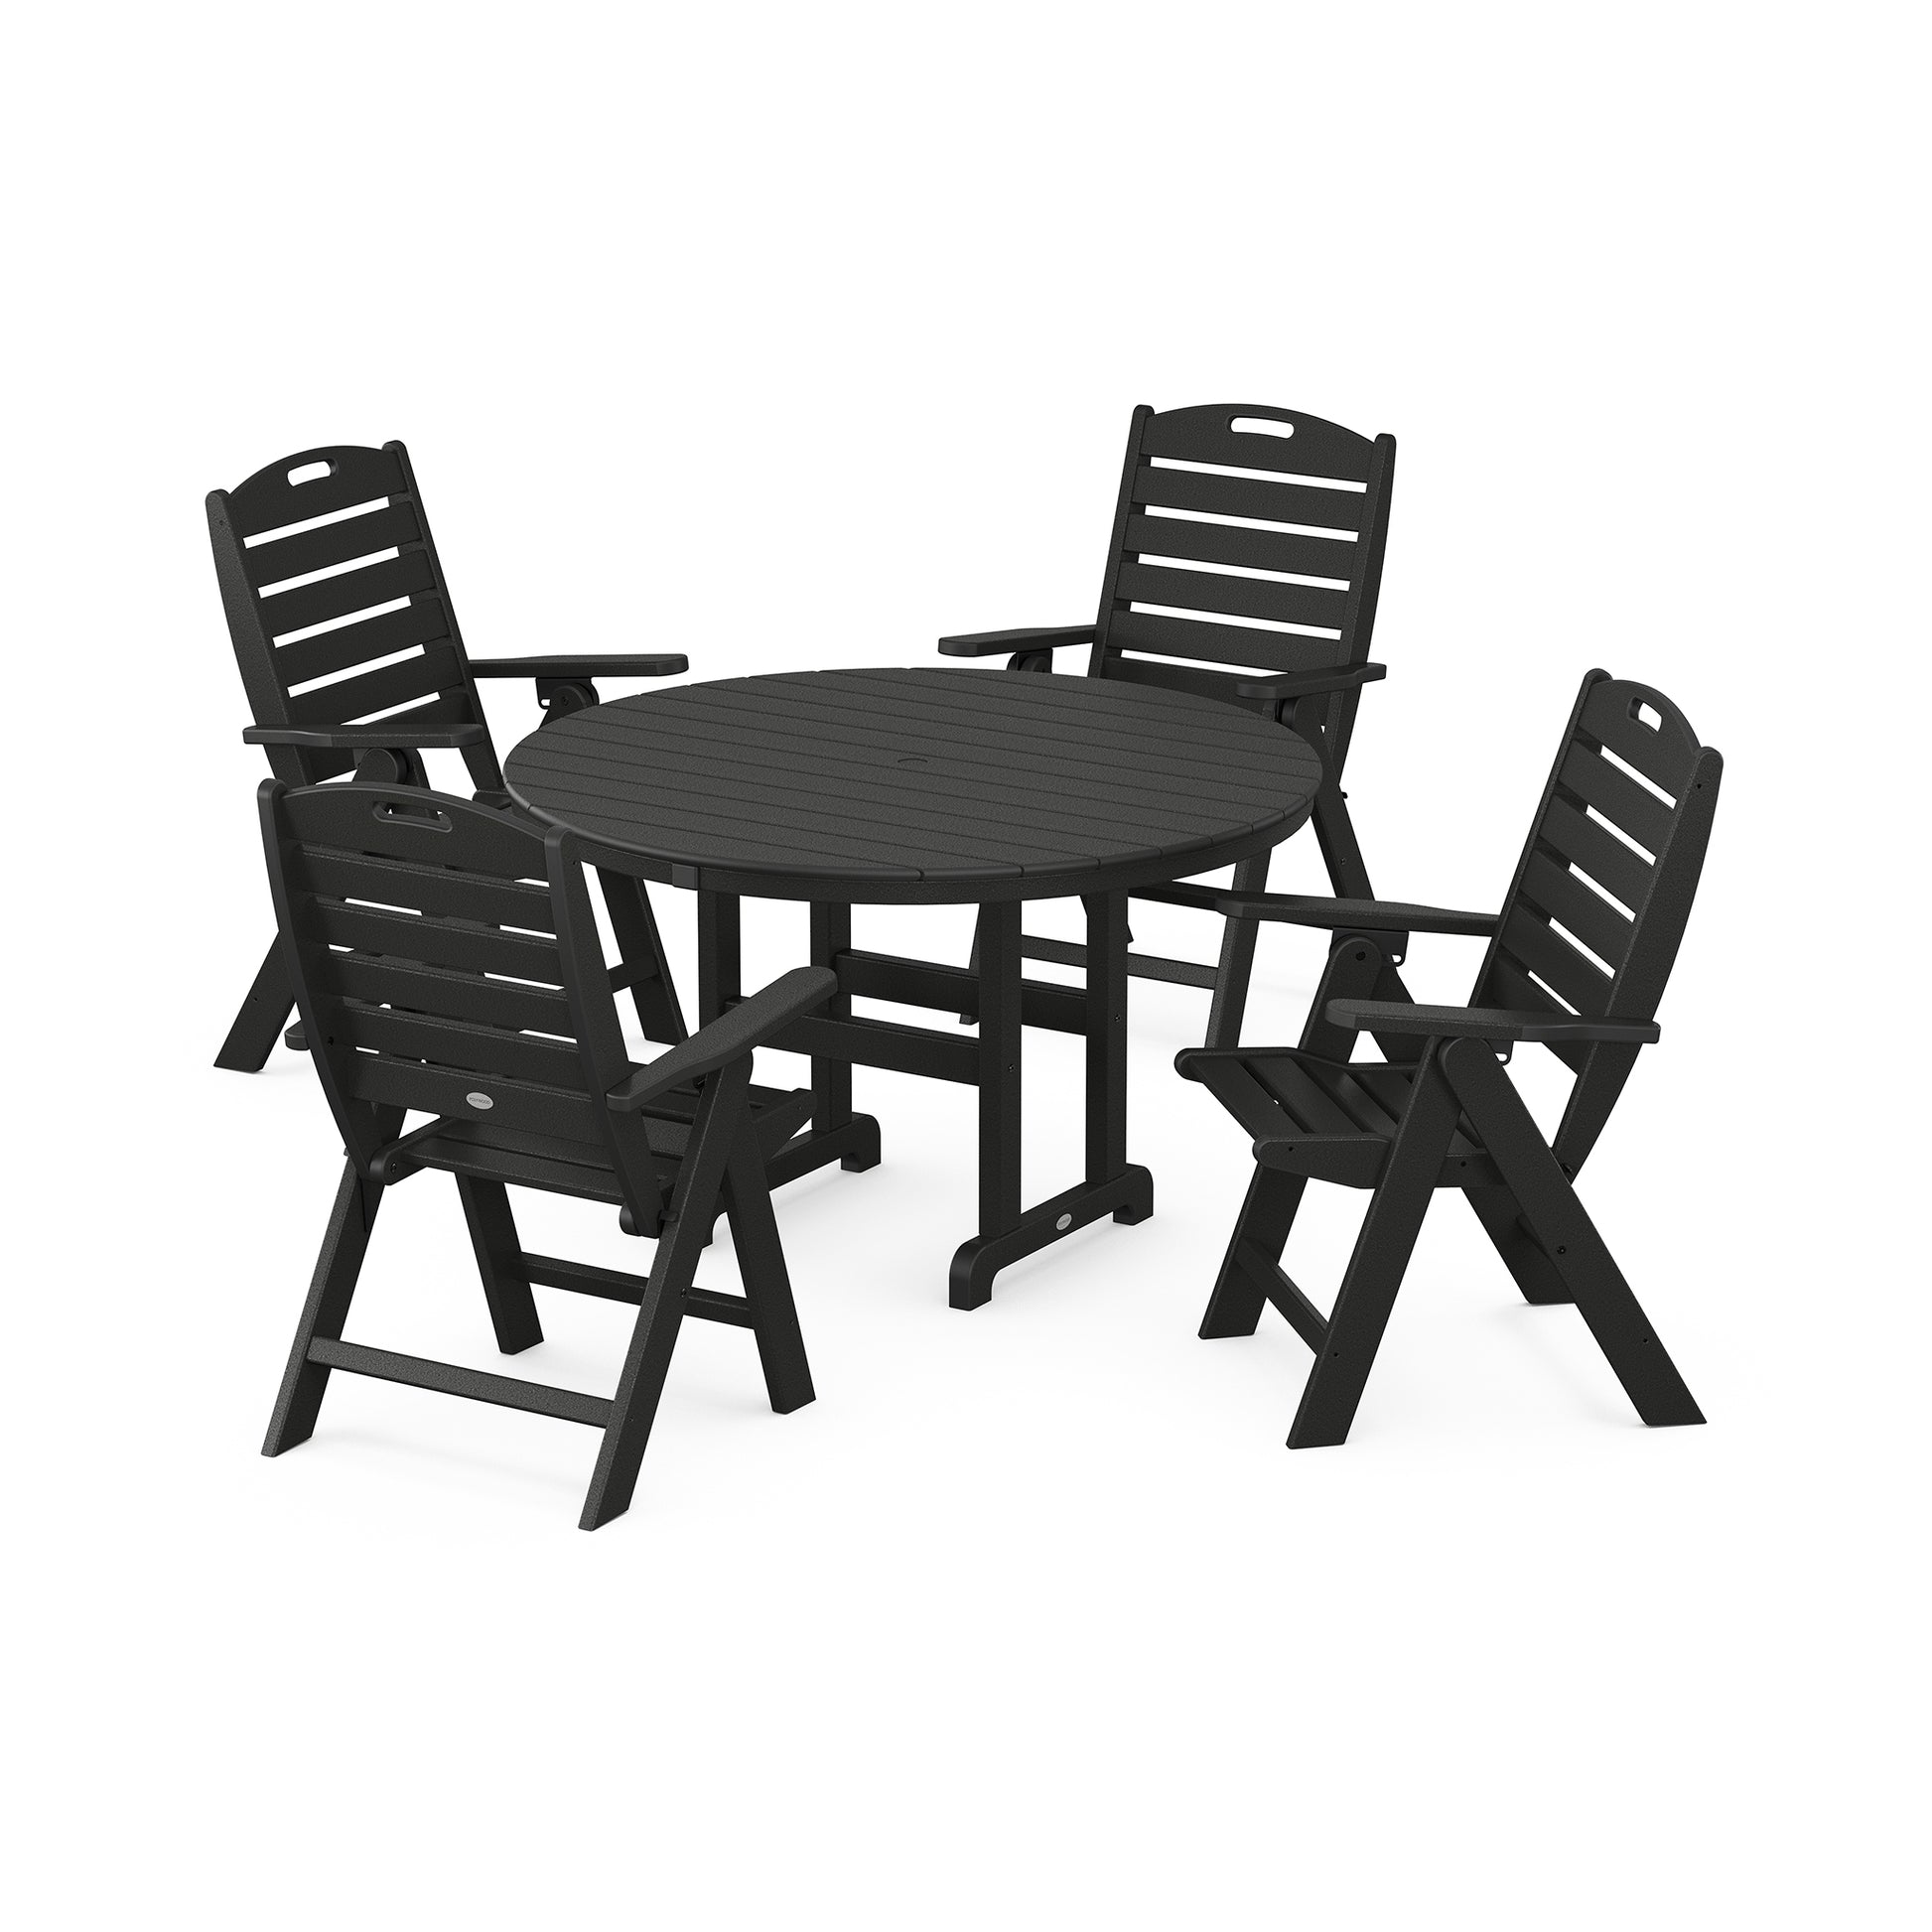 A black POLYWOOD® Nautical 5-Piece Dining Set comprising one round table and four folding chairs on a white background. The chairs feature vertical slat backs.